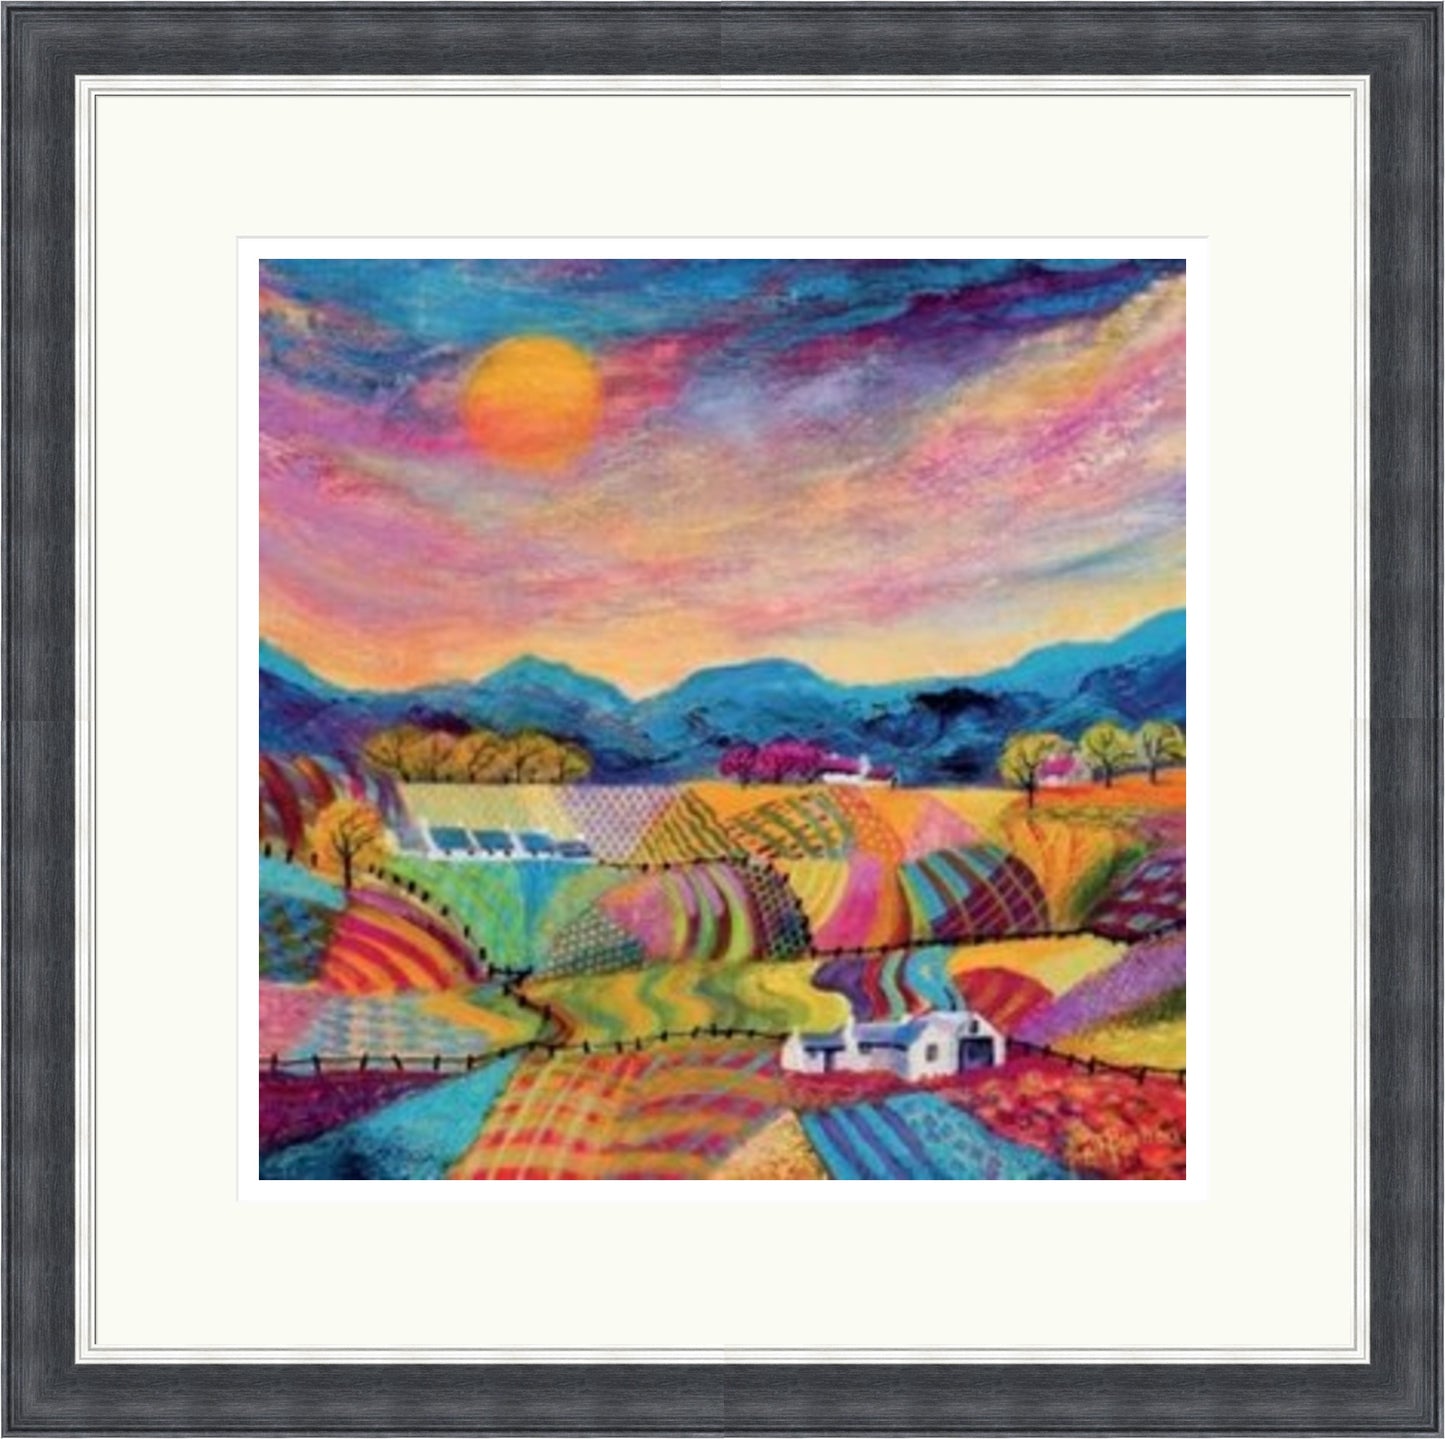 Profusion of Colour (Limited Edition) by Kathleen Buchan